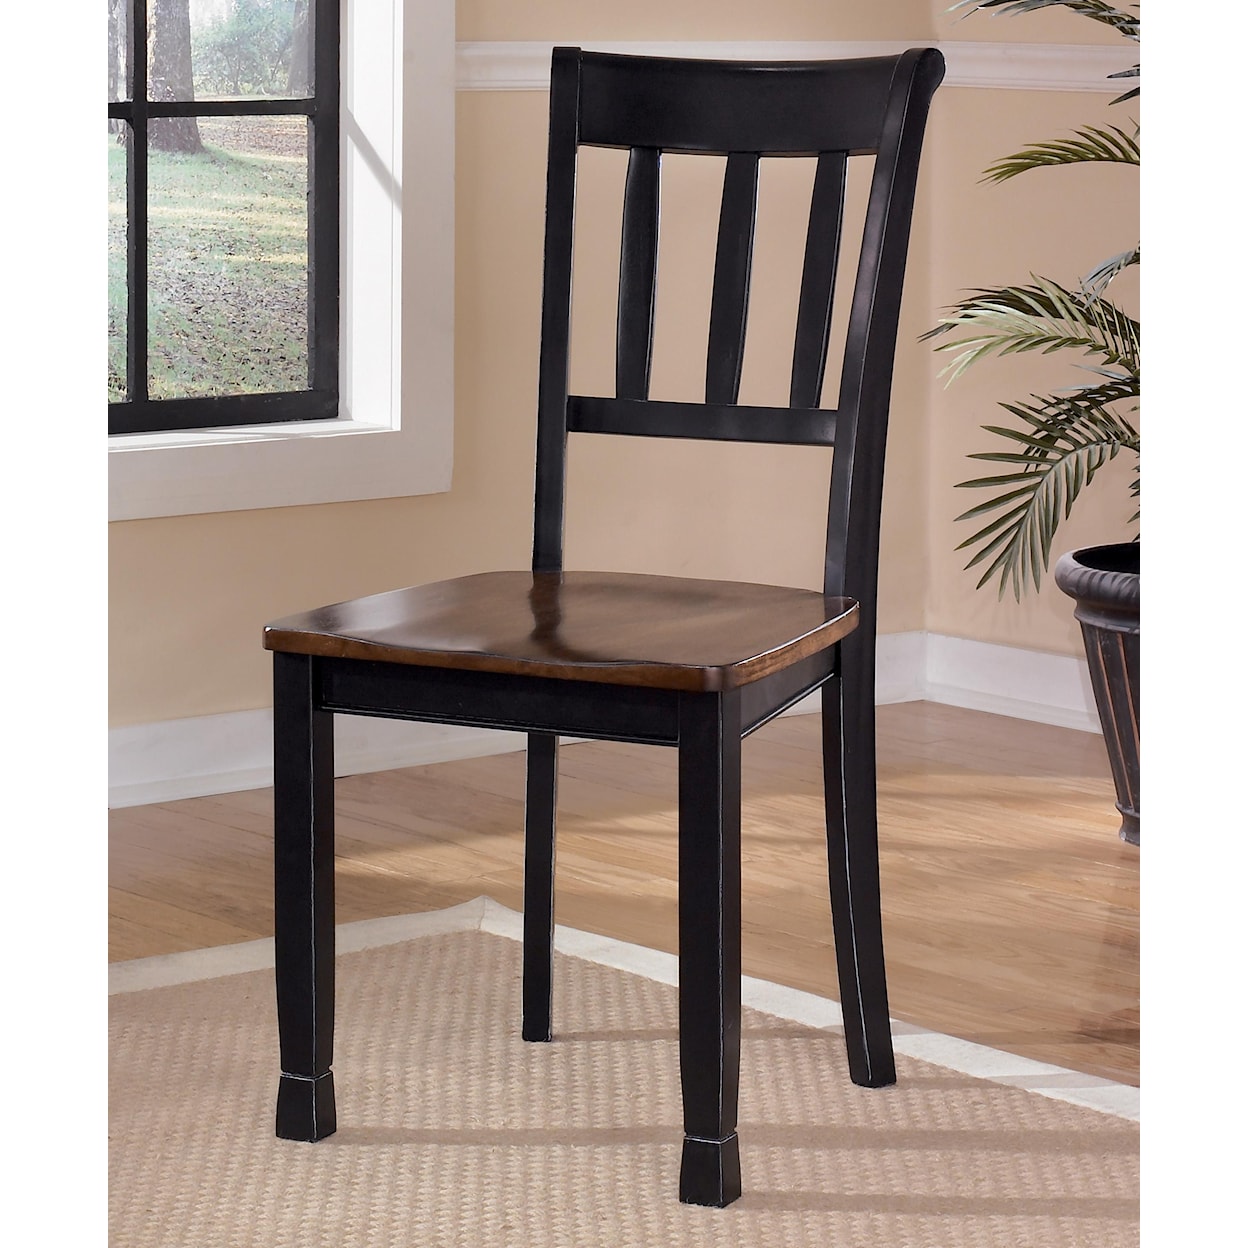 Signature Design Owingsville Dining Room Side Chair